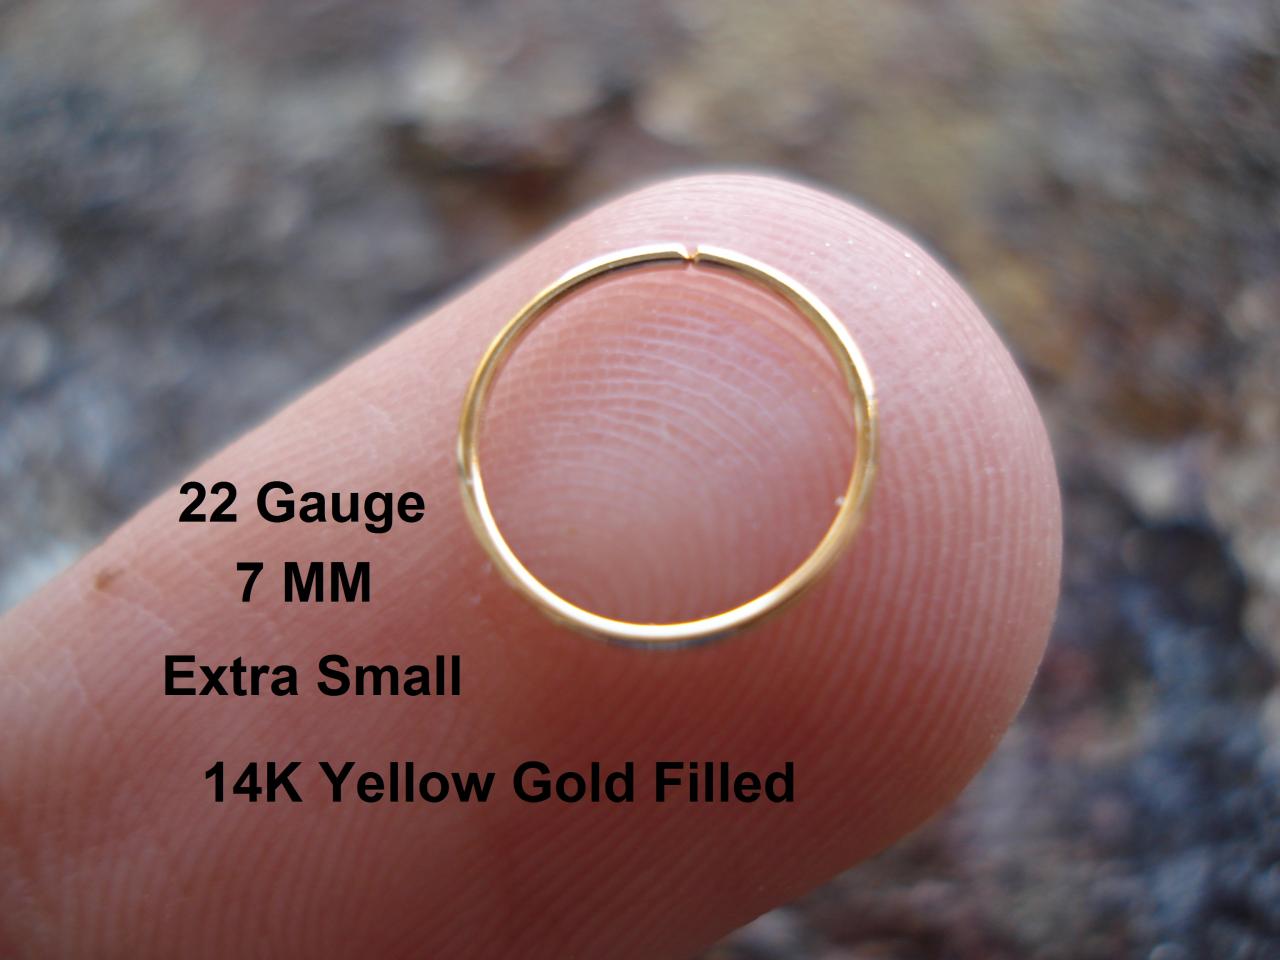 Extra Small 22 Gauge 14k Yellow Gold Filled For Nose Ring/hoop Helix/earring/tragus,7 Mm Inner Diameter